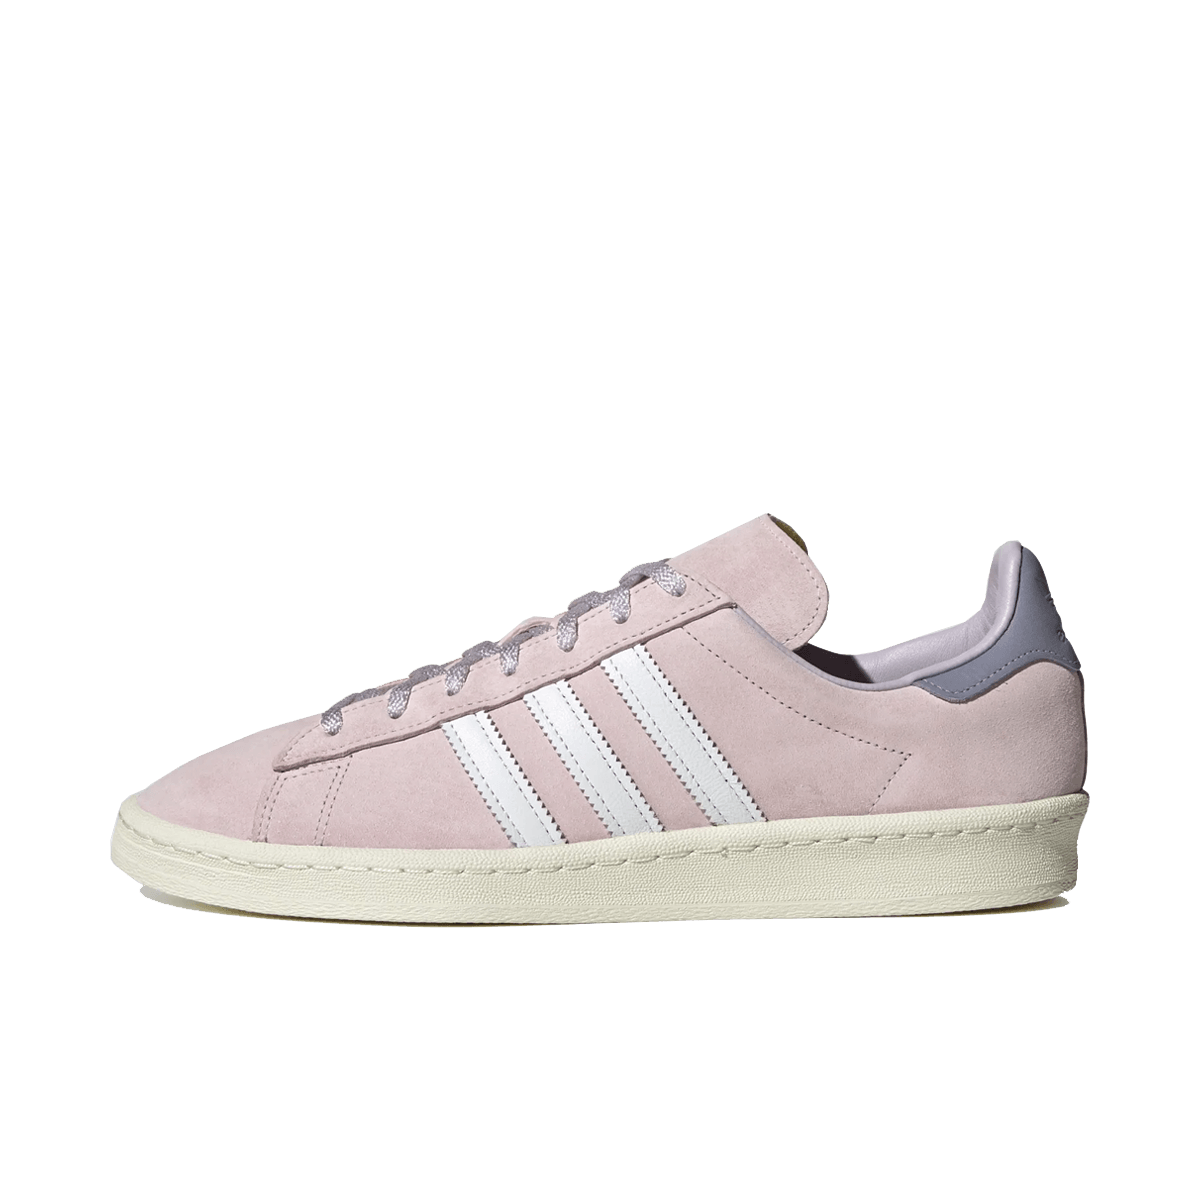 adidas Campus 80s 'Almost Pink'